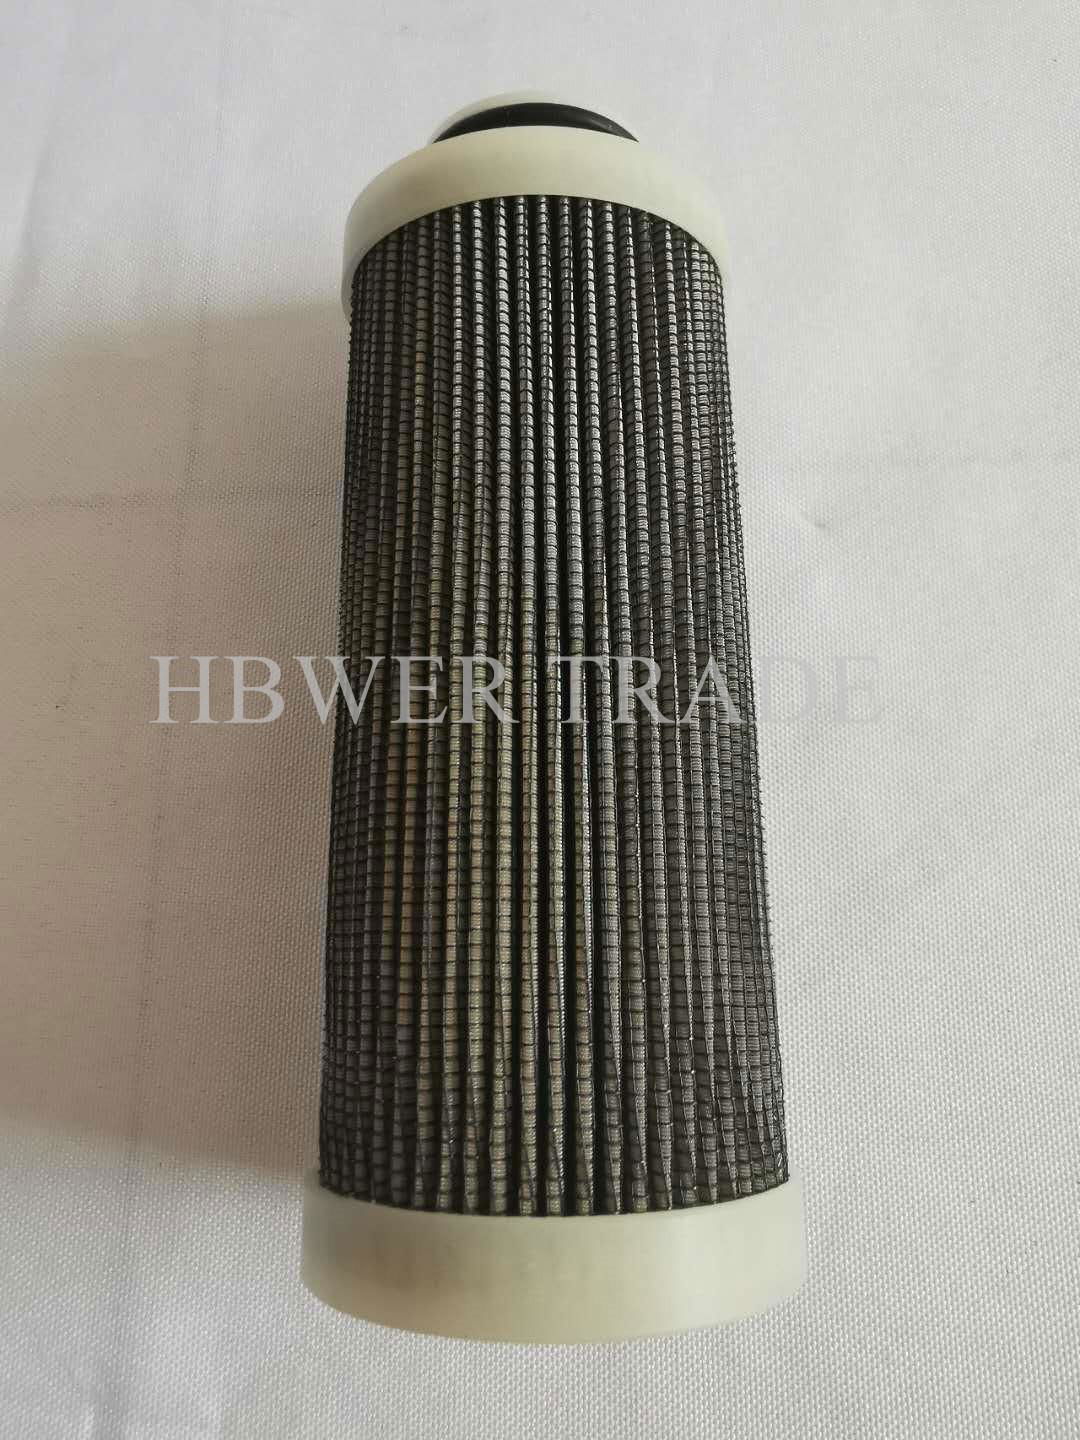 Hydraulic oil filter element HQ25.300.14 power plant anti-fuel system filter ele 4